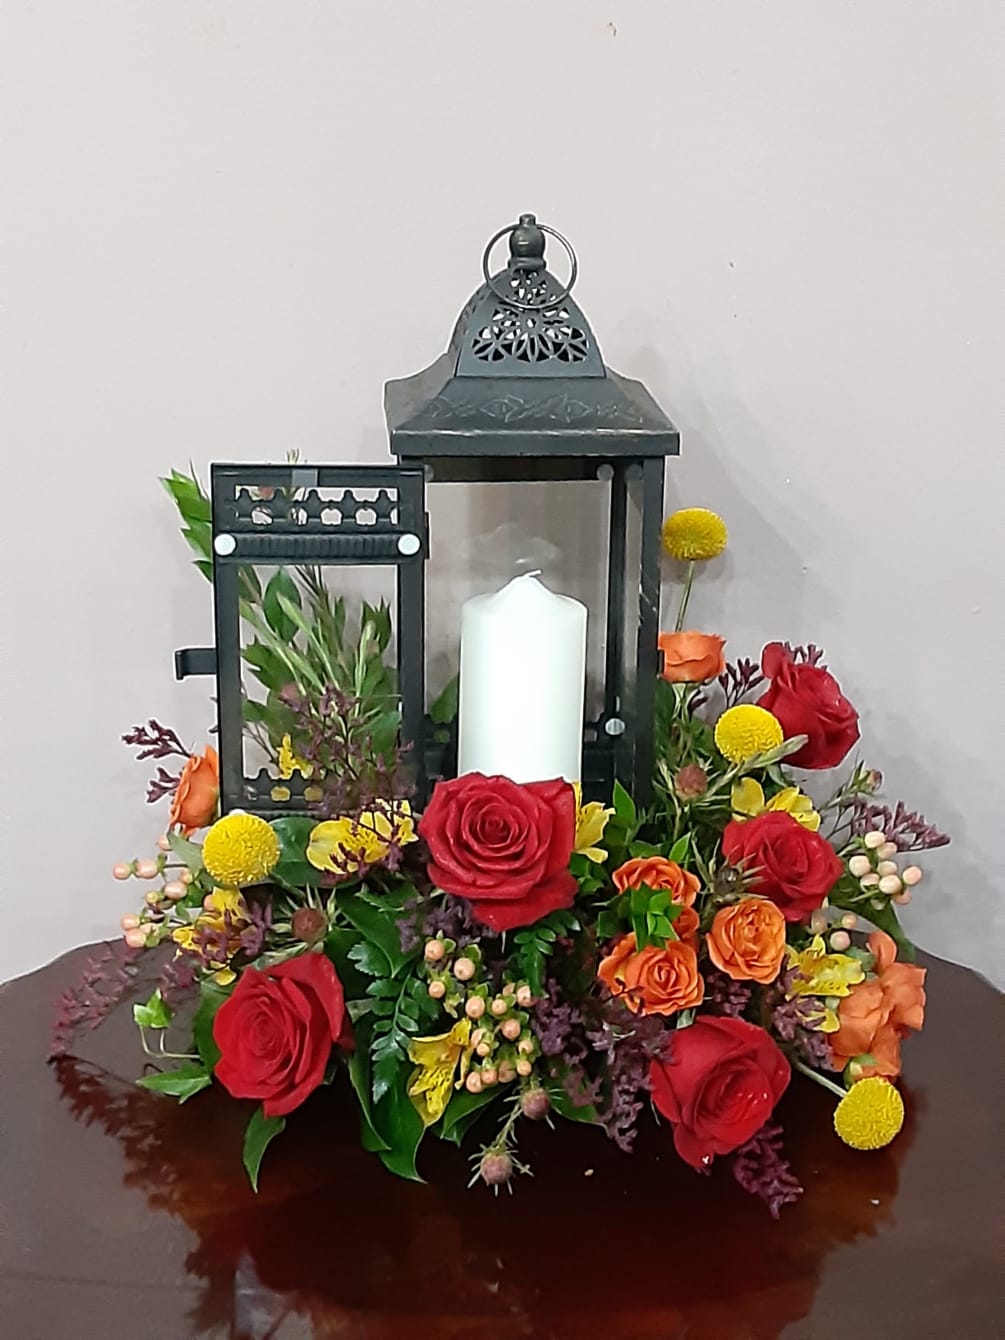 A rustic wooden lantern with fresh flowers spilling out and a pillar